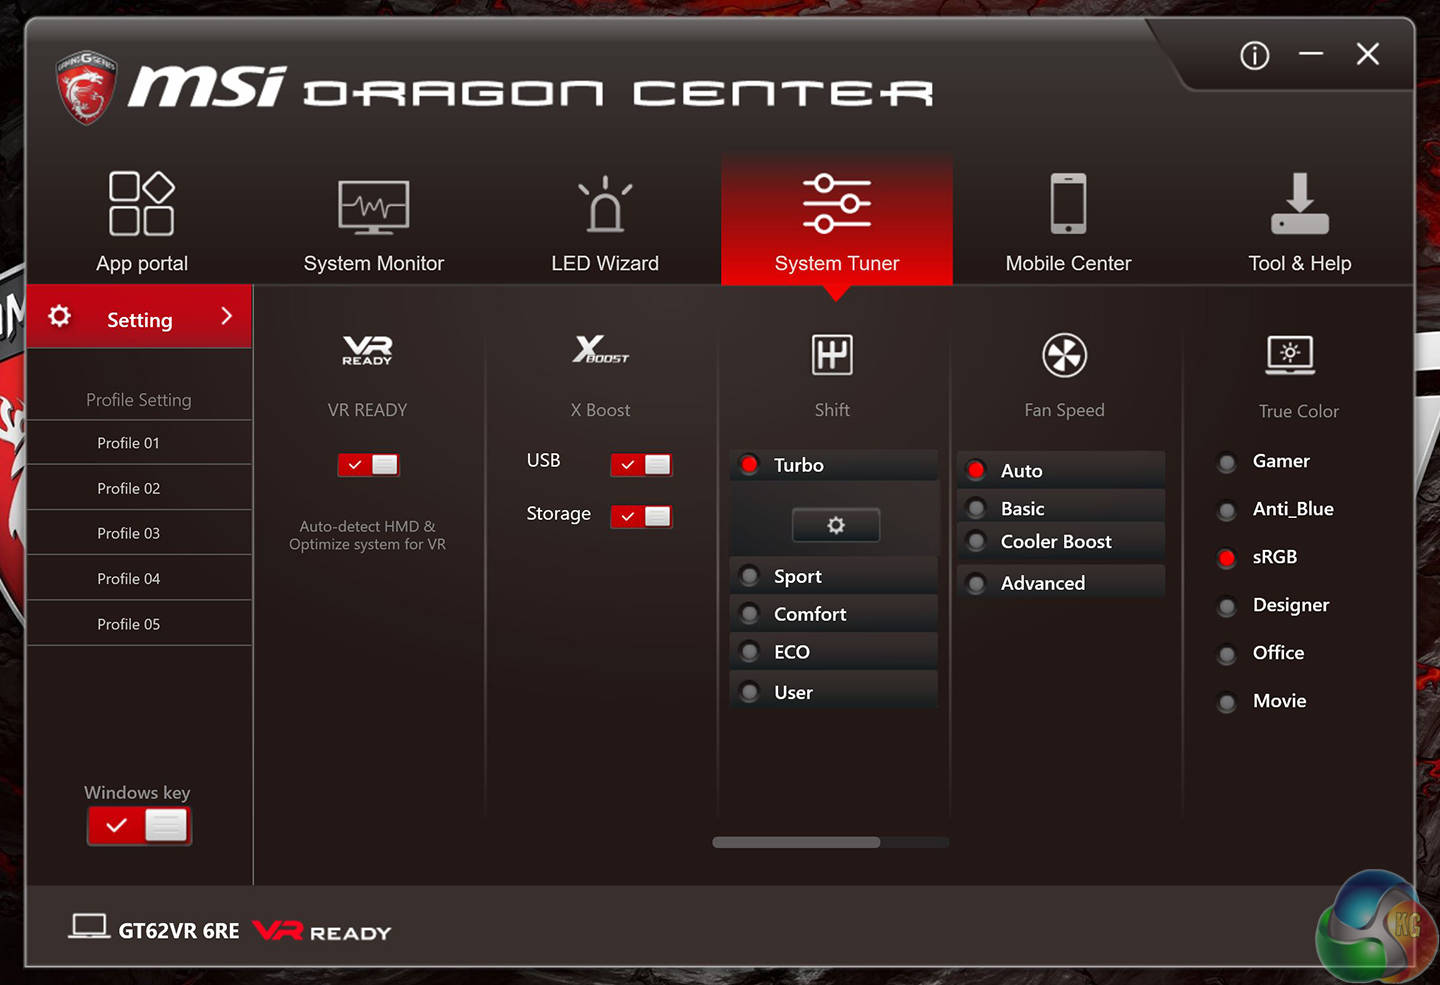 msi dragon center led wizard not working